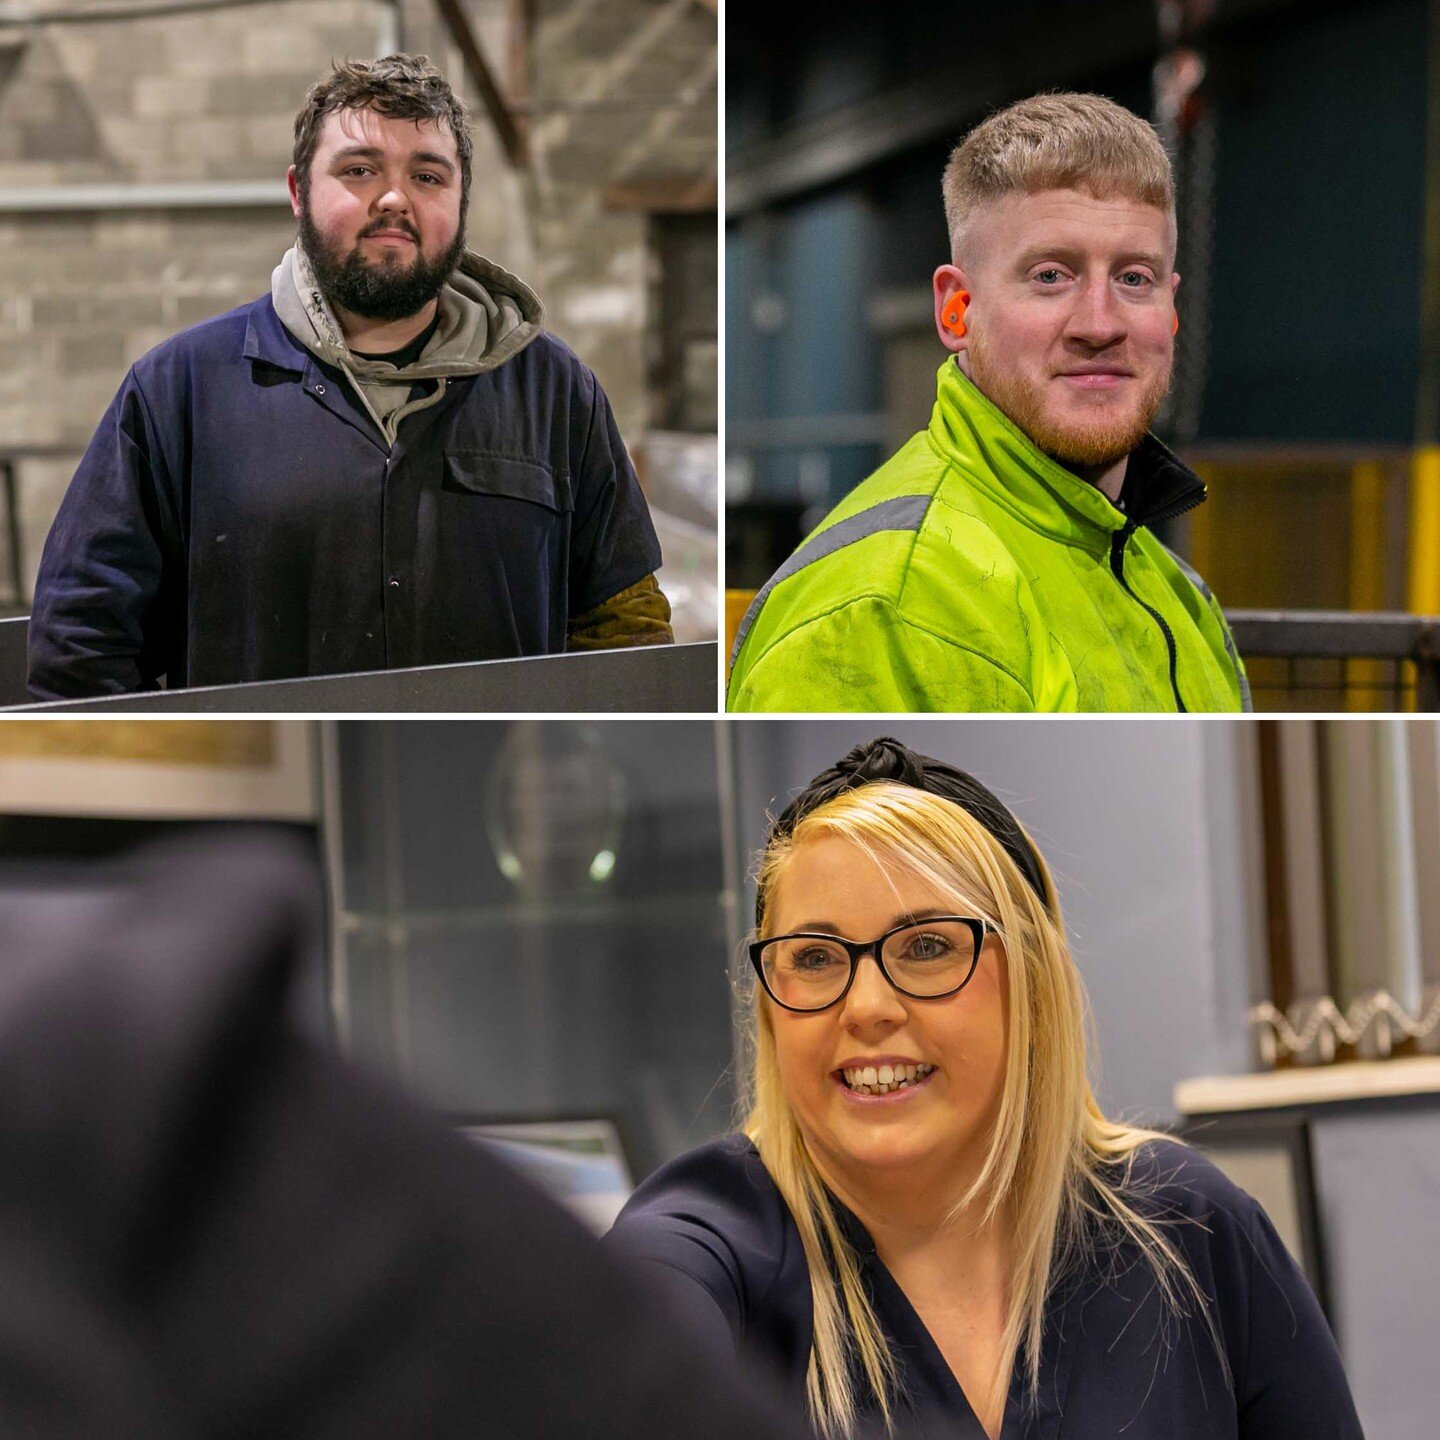 At Shufflebottom we know our staff is our greatest business asset and so it&rsquo;s time to begin shining a spotlight on our #teamofsteel:
Ethan Cooper &ndash; Apprentice Welder
Stewart Hemmingway &ndash; Machine Operator
Stacey Watling &ndash; Admin